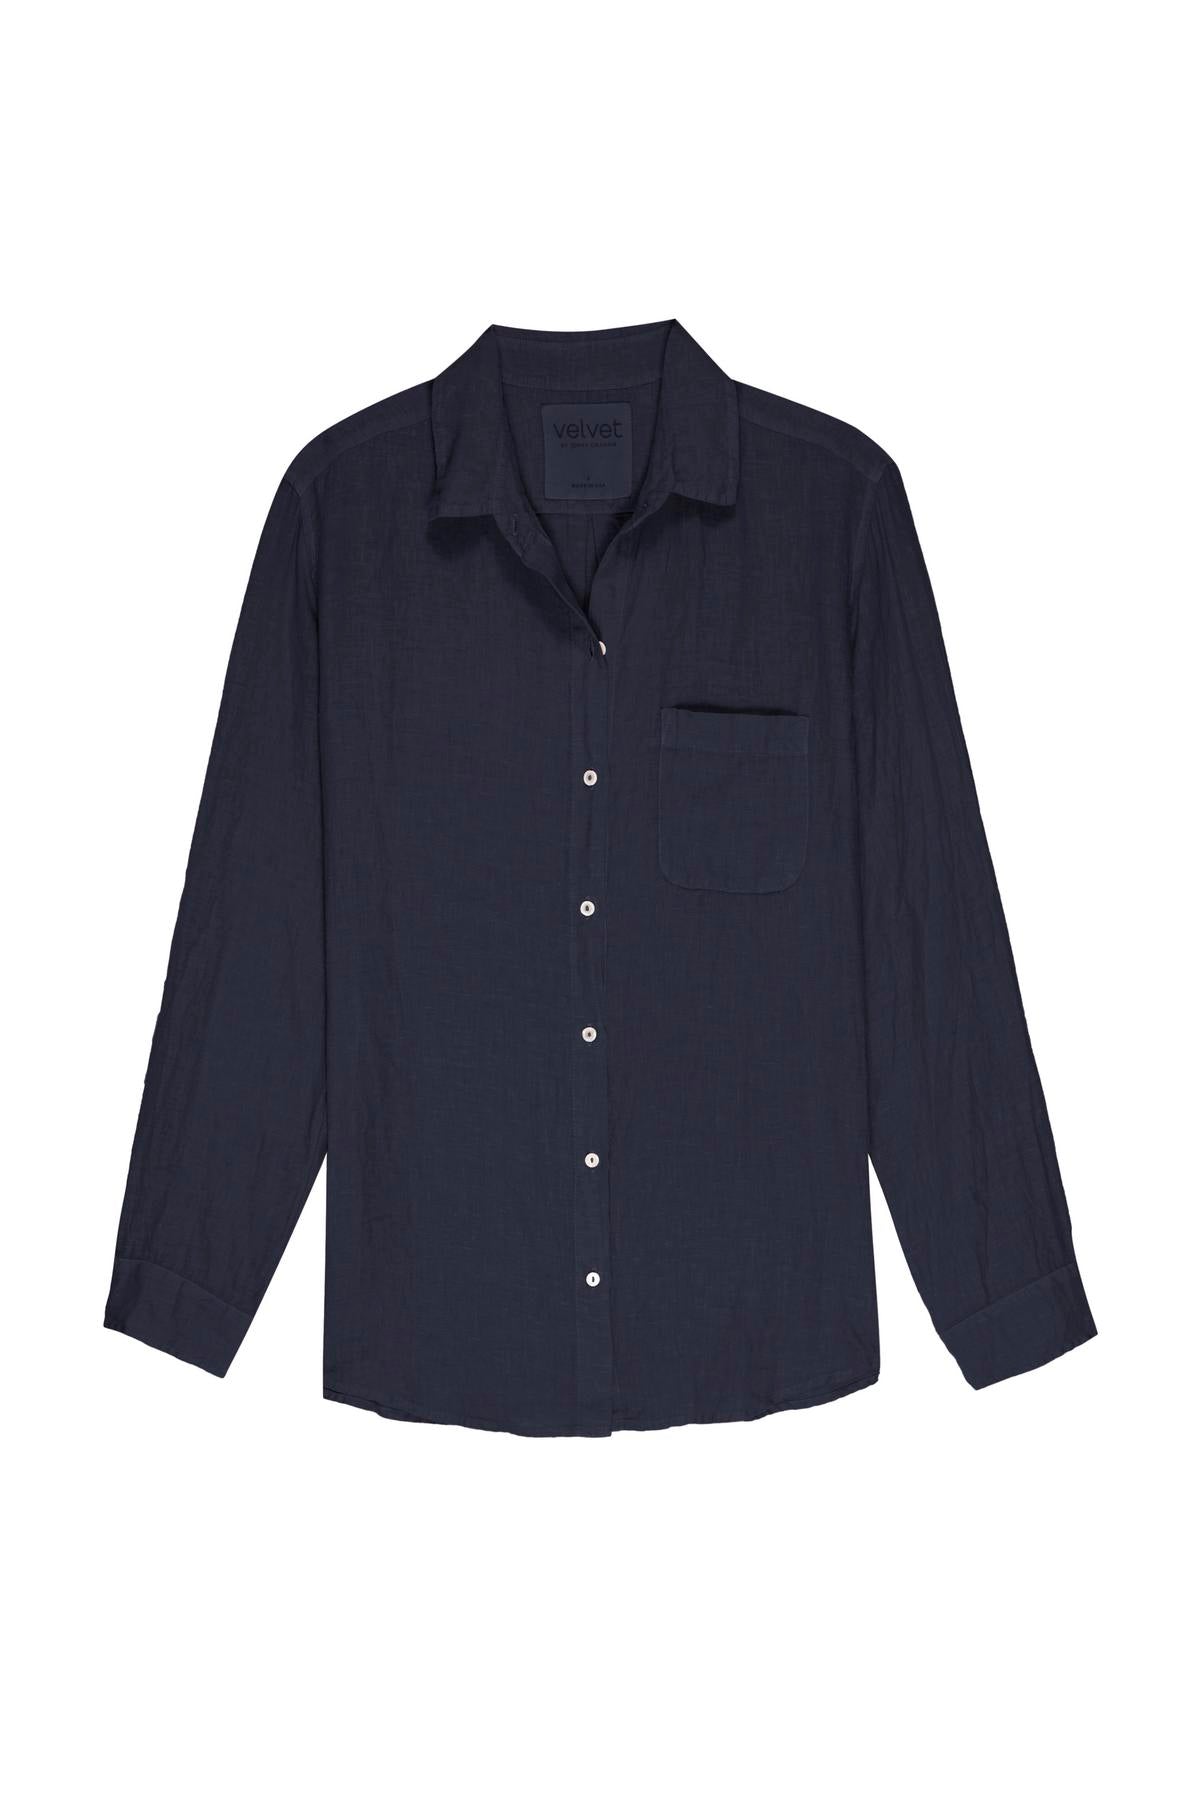 A long-sleeved, dark navy MULHOLLAND LINEN SHIRT by Velvet by Jenny Graham featuring a collar, a left chest pocket, and a relaxed silhouette.-36592968564929